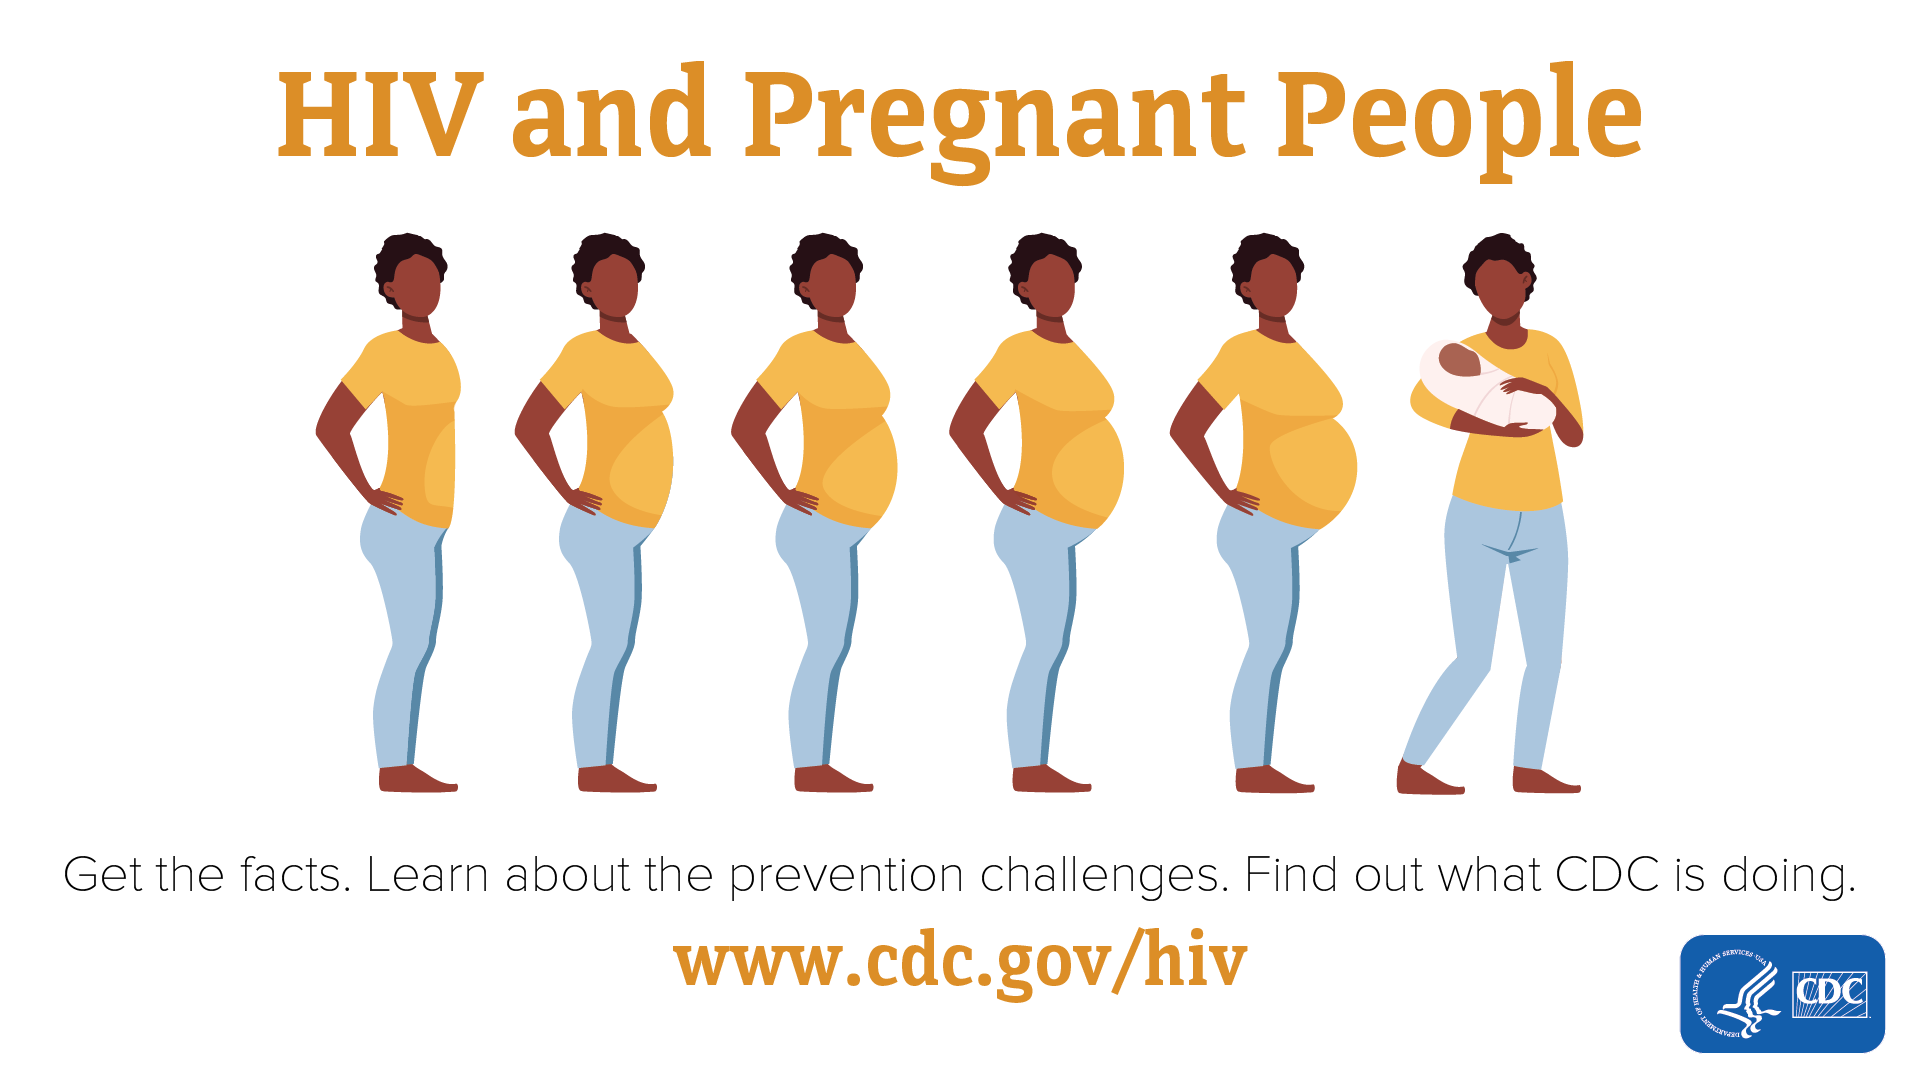 literature review of hiv in pregnancy